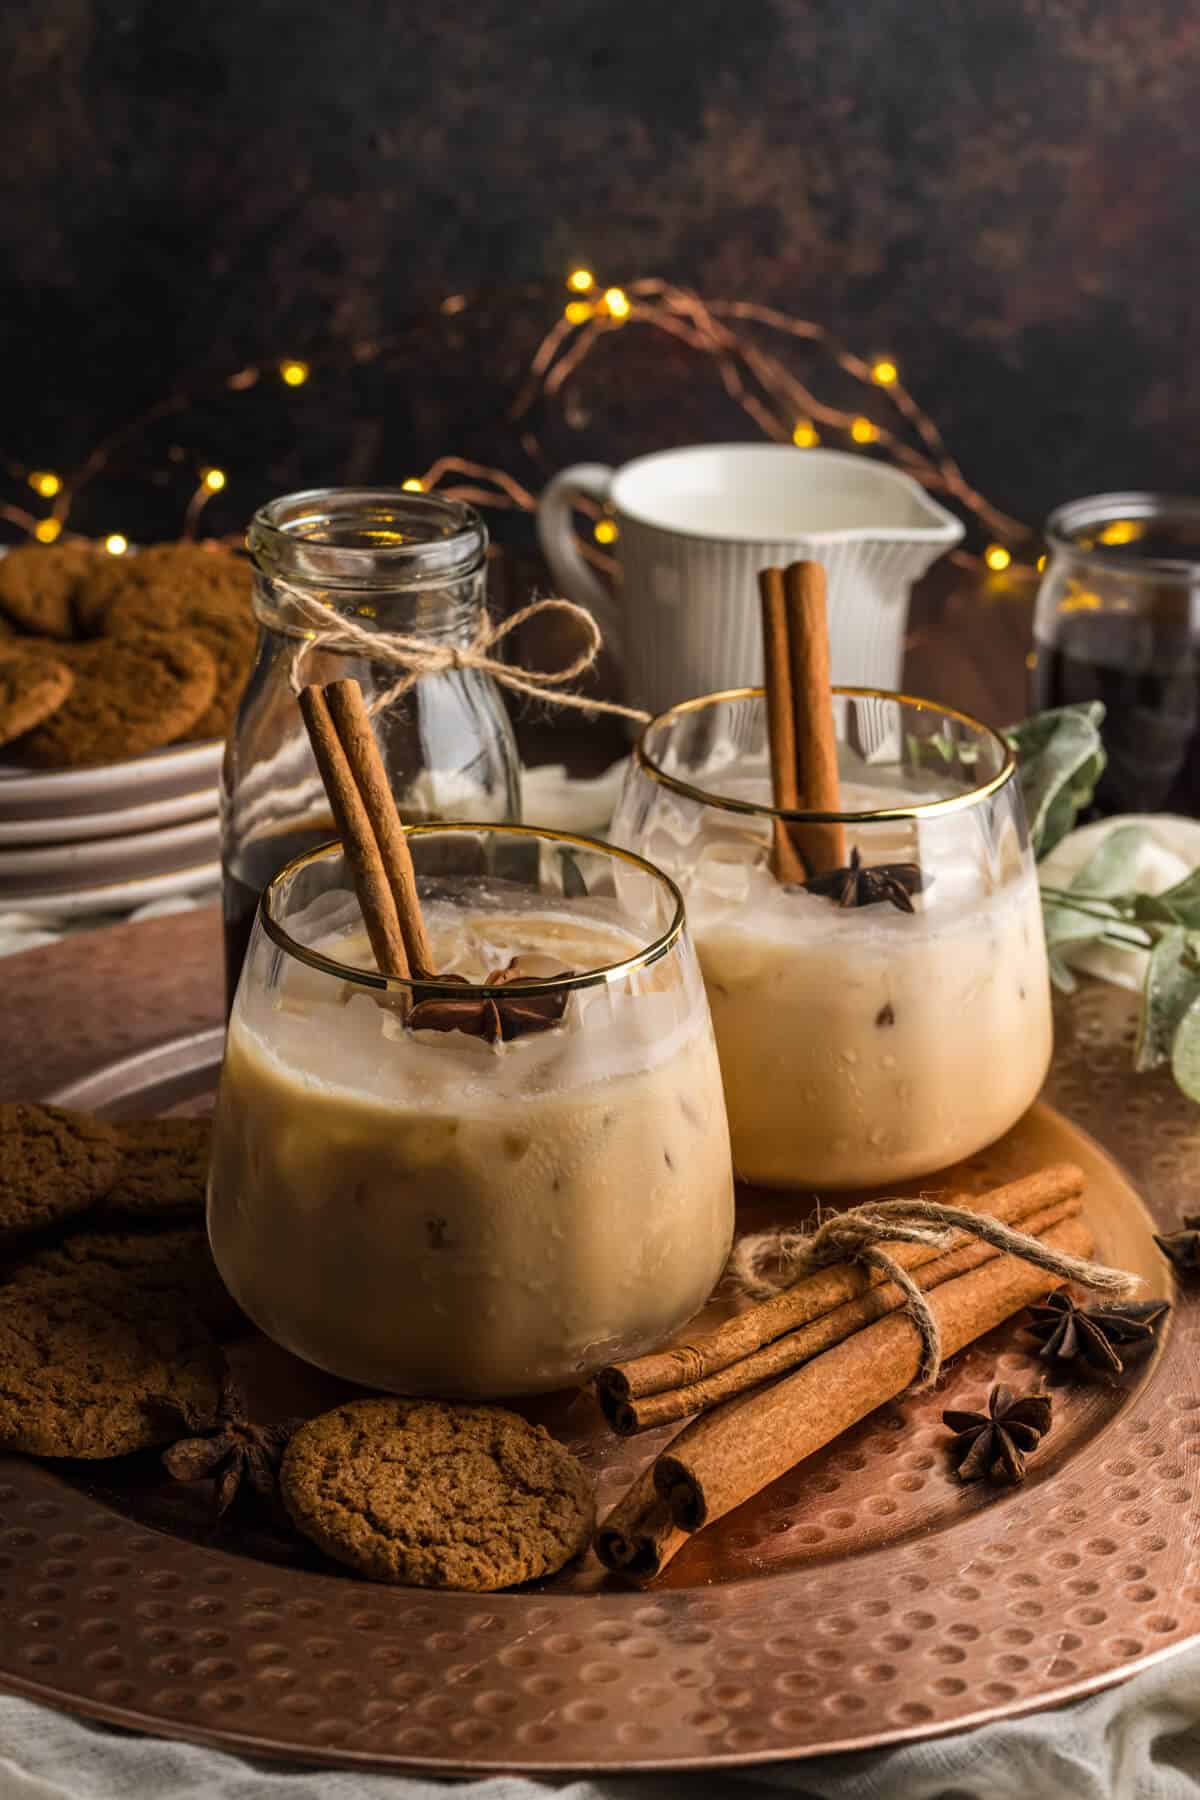 Two Gingerbread White Russians (non-alcoholic) in a gold rimmed ribbed stemless glass, garnished with cinnamon sticks and star anise. The drinks are surrounded with gingersnap cookies and more cinnamon sticks with twinkle lights in the background.